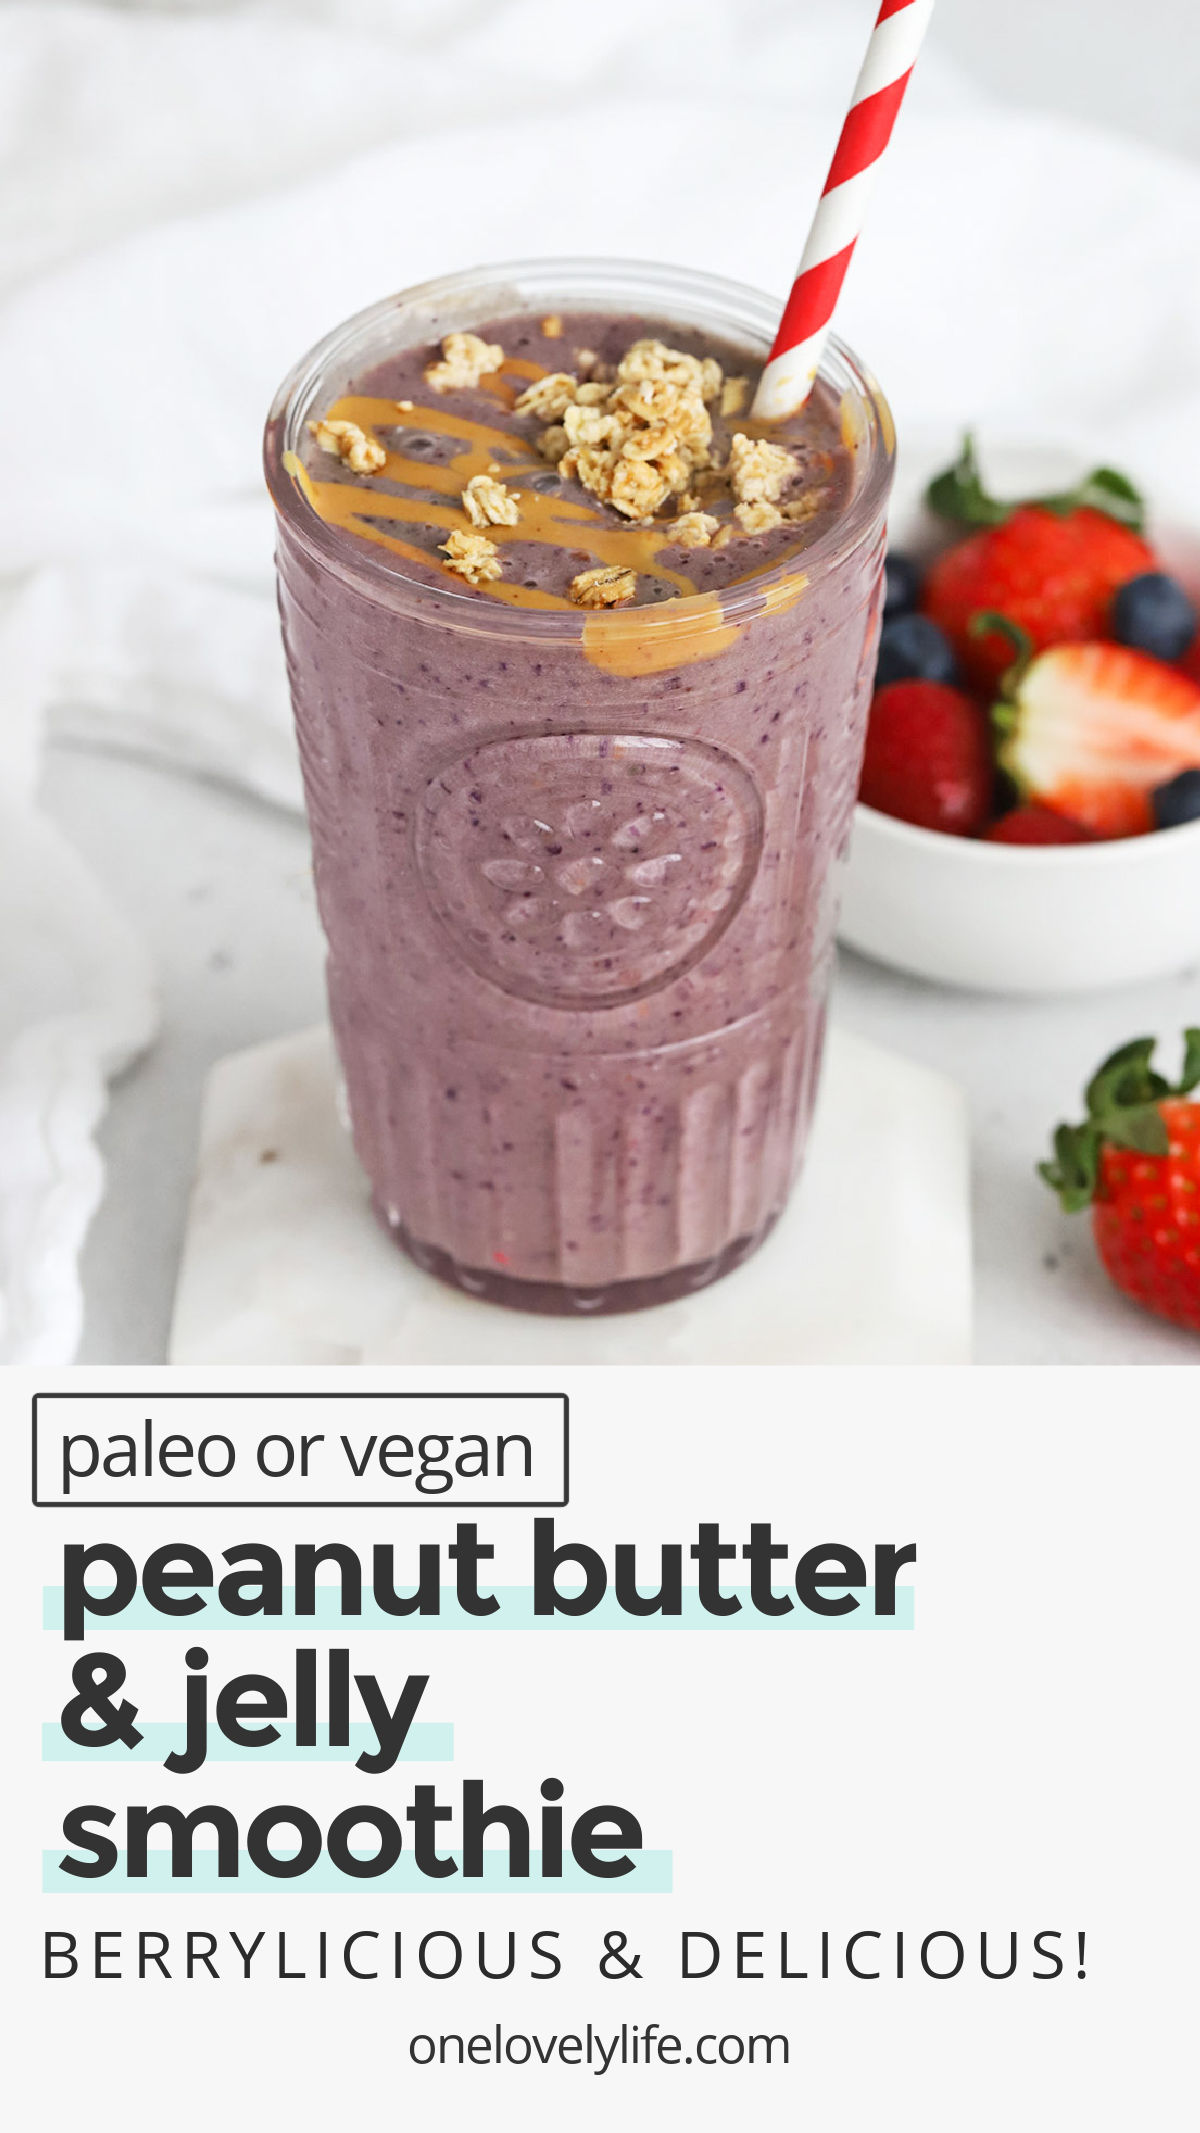 Peanut Butter Jelly Smoothie - We channeled these classic sandwich flavors into a PBJ smoothie! With ripe berries and creamy peanut butter, you'll love this satisfying smoothie recipe. (Gluten-Free, Vegan-Friendly) // pb&j smoothies // pb & j smoothies // almond butter and berry smoothie // peanut butter berry smoothie // vegan smoothie // healthy smoothie // paleo smoothie // peanut butter smoothies // berry smoothies